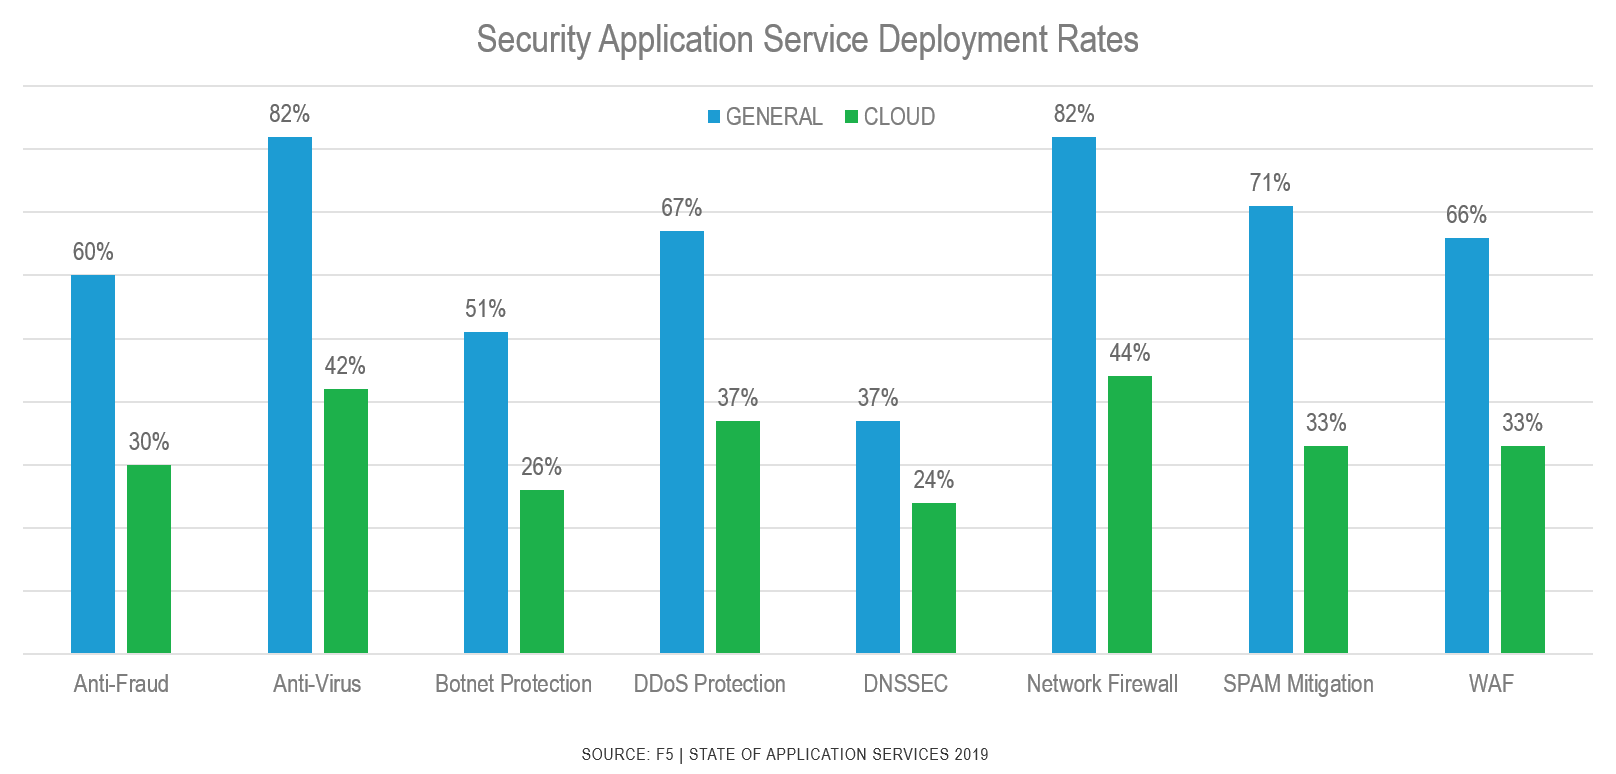 Security application service deployment rates